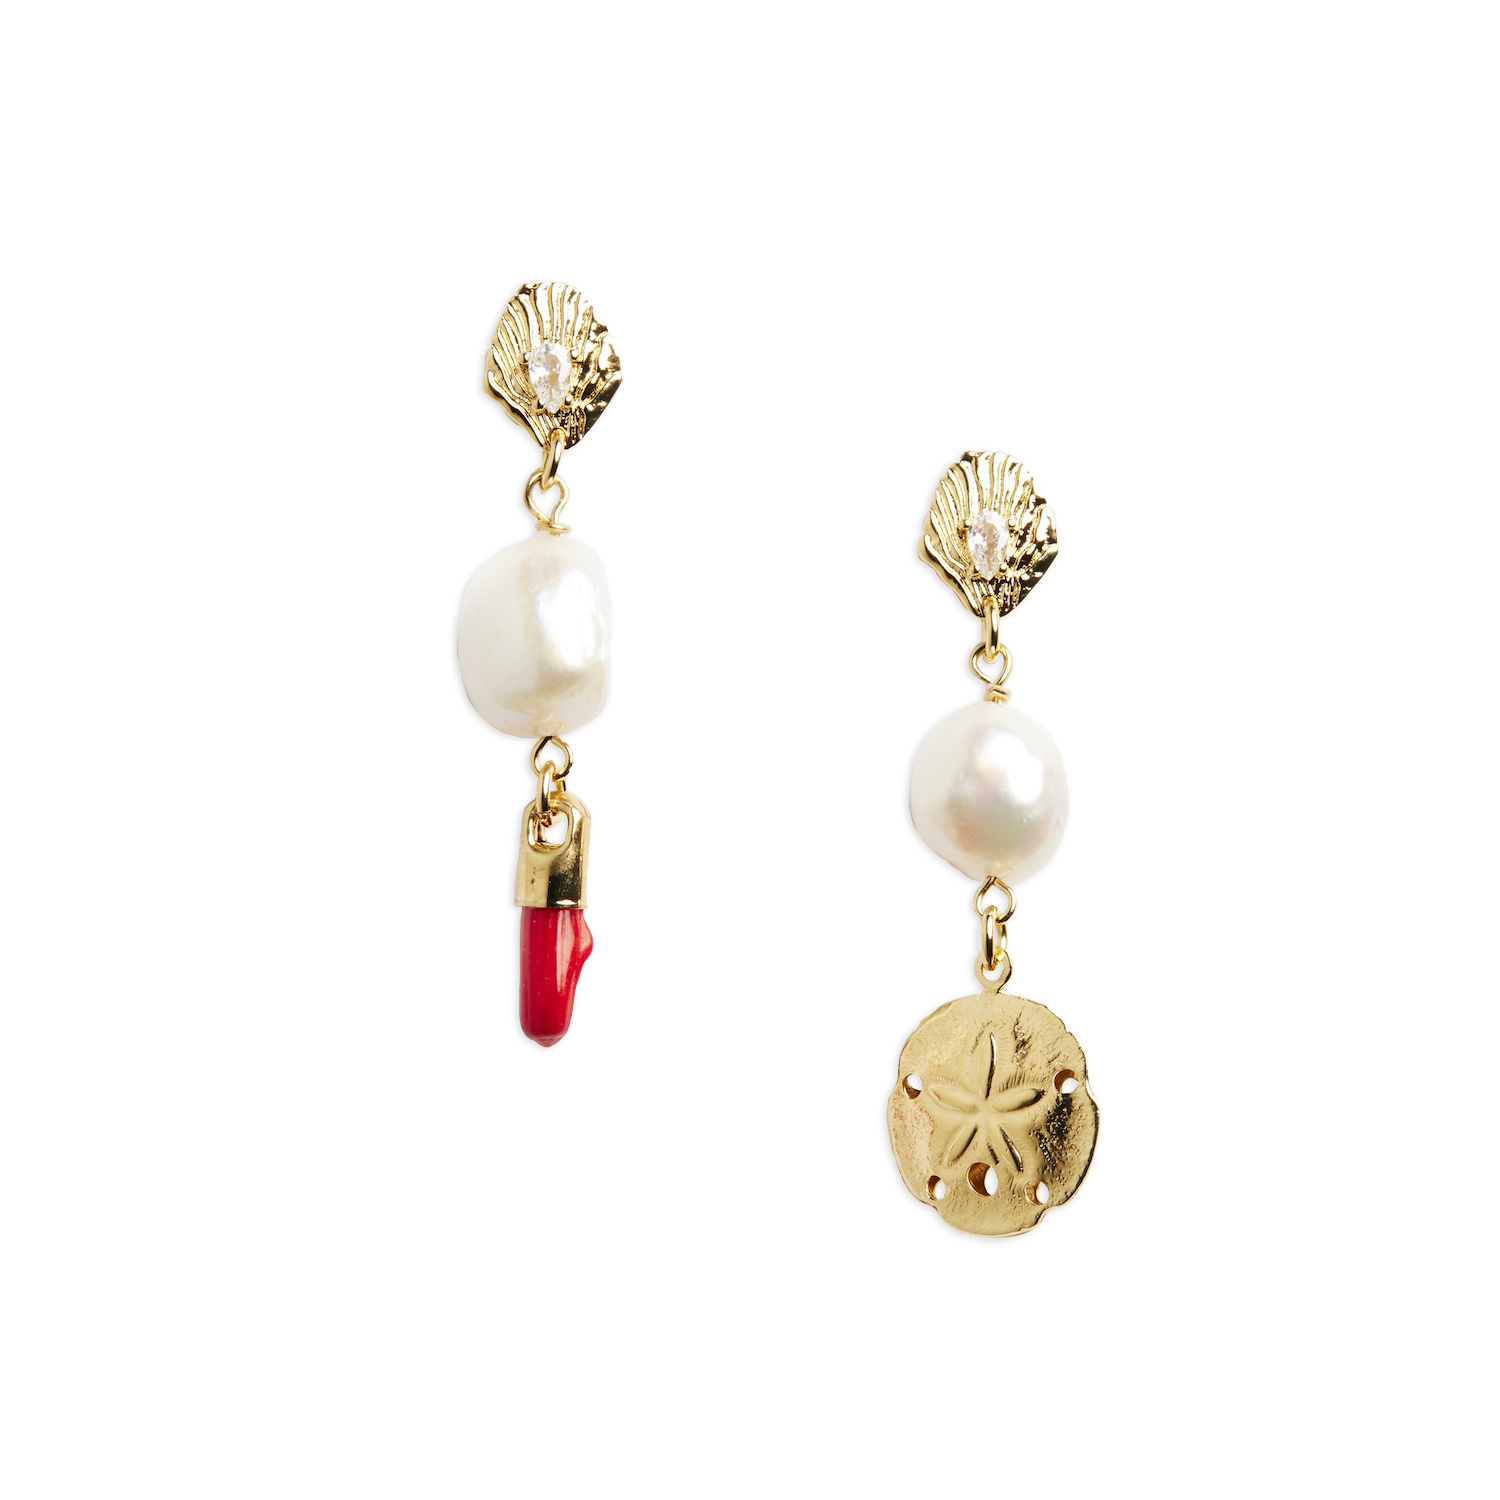 A pair of mismatched earrings each of which is topped by a tiny scallop shell. In three sections you have the shell at the top, then a freshwater pearl hanging from that, and attached to the bottom of the left is a piece of red, coral-shaped resin while the right has a small gold sand-dollar charm. 